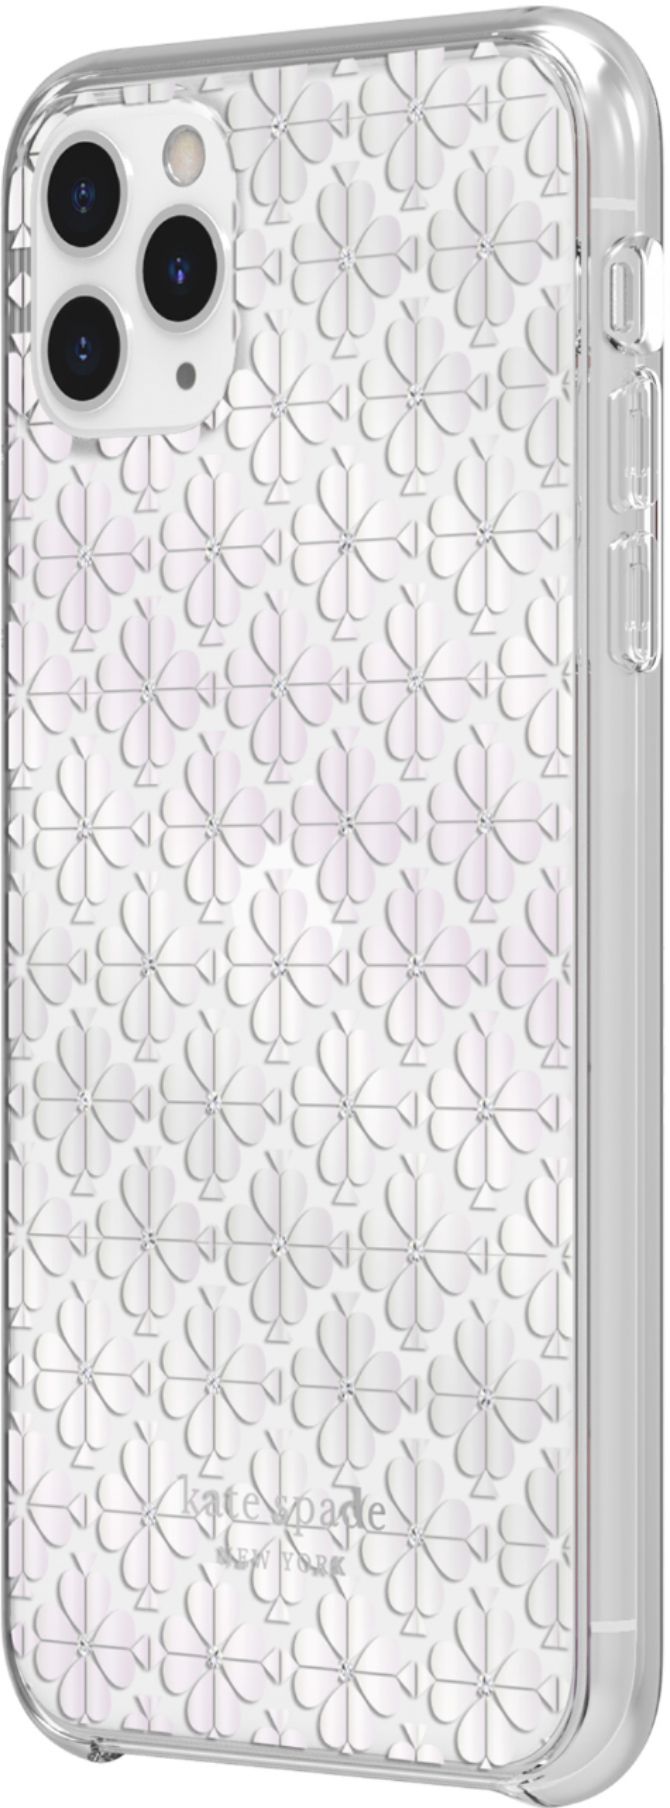 Left View: kate spade new york - Protective Hard Shell Case for Apple® iPhone® 11 Pro Max - Crystal Gems/Spade Flower Pearl Foil